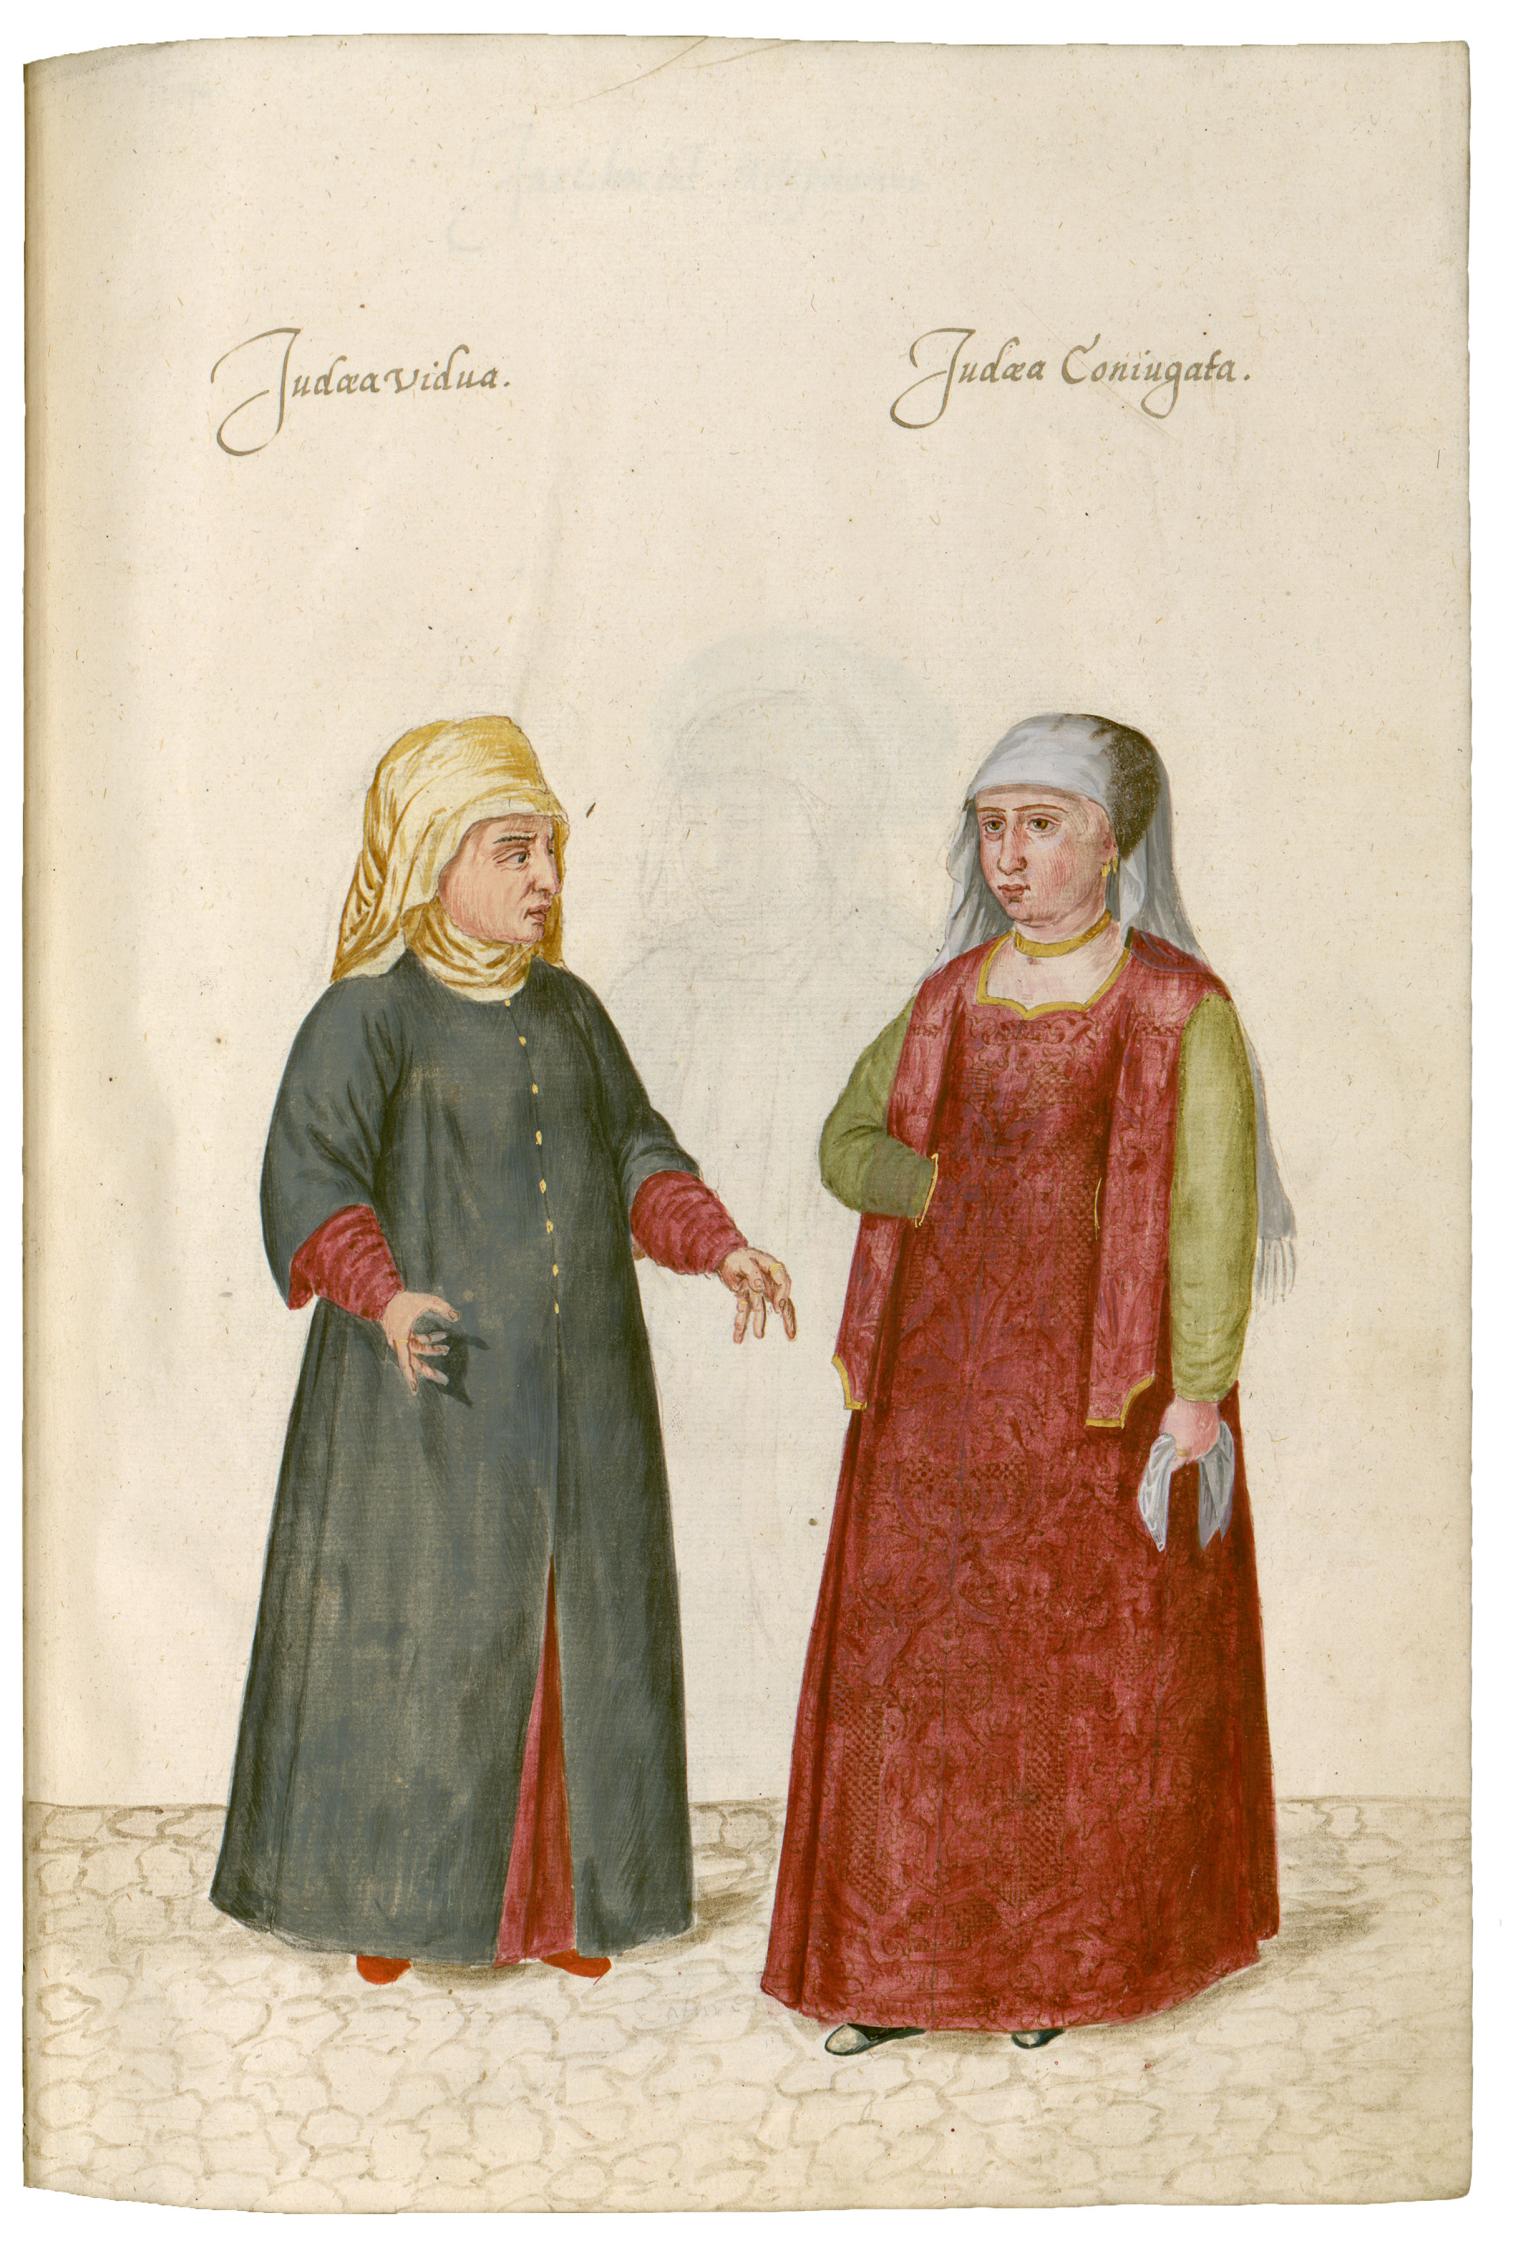 Watercolor depicting two woman standing wearing head coverings and dresses with Latin text above. 